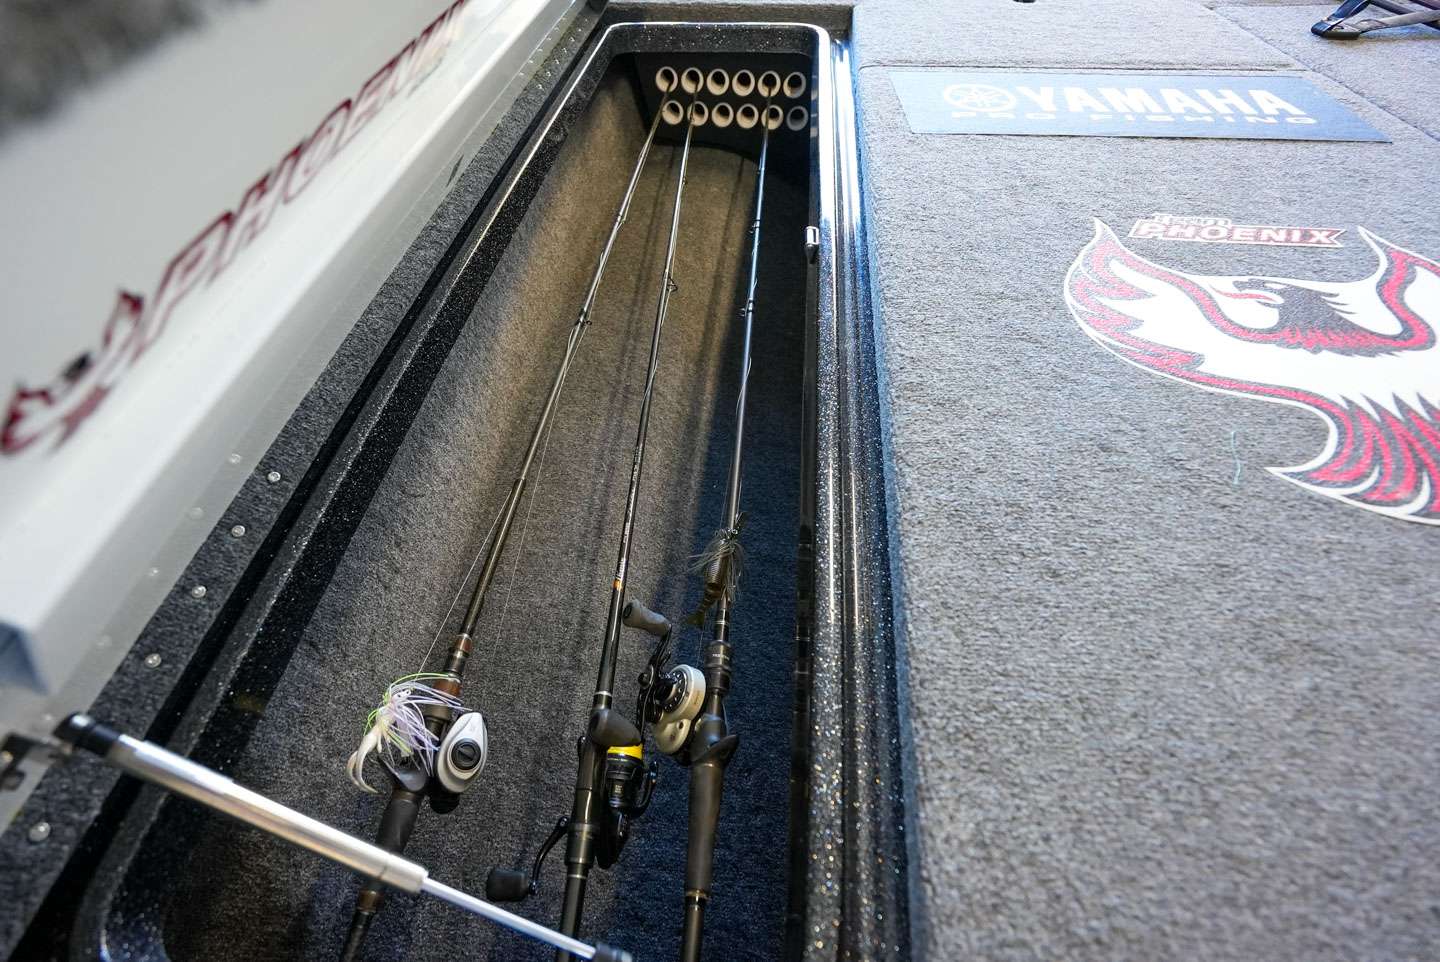 Davis only had a few rods in the rod box at the time, but he typically carries well over 20 rods in the boat. 